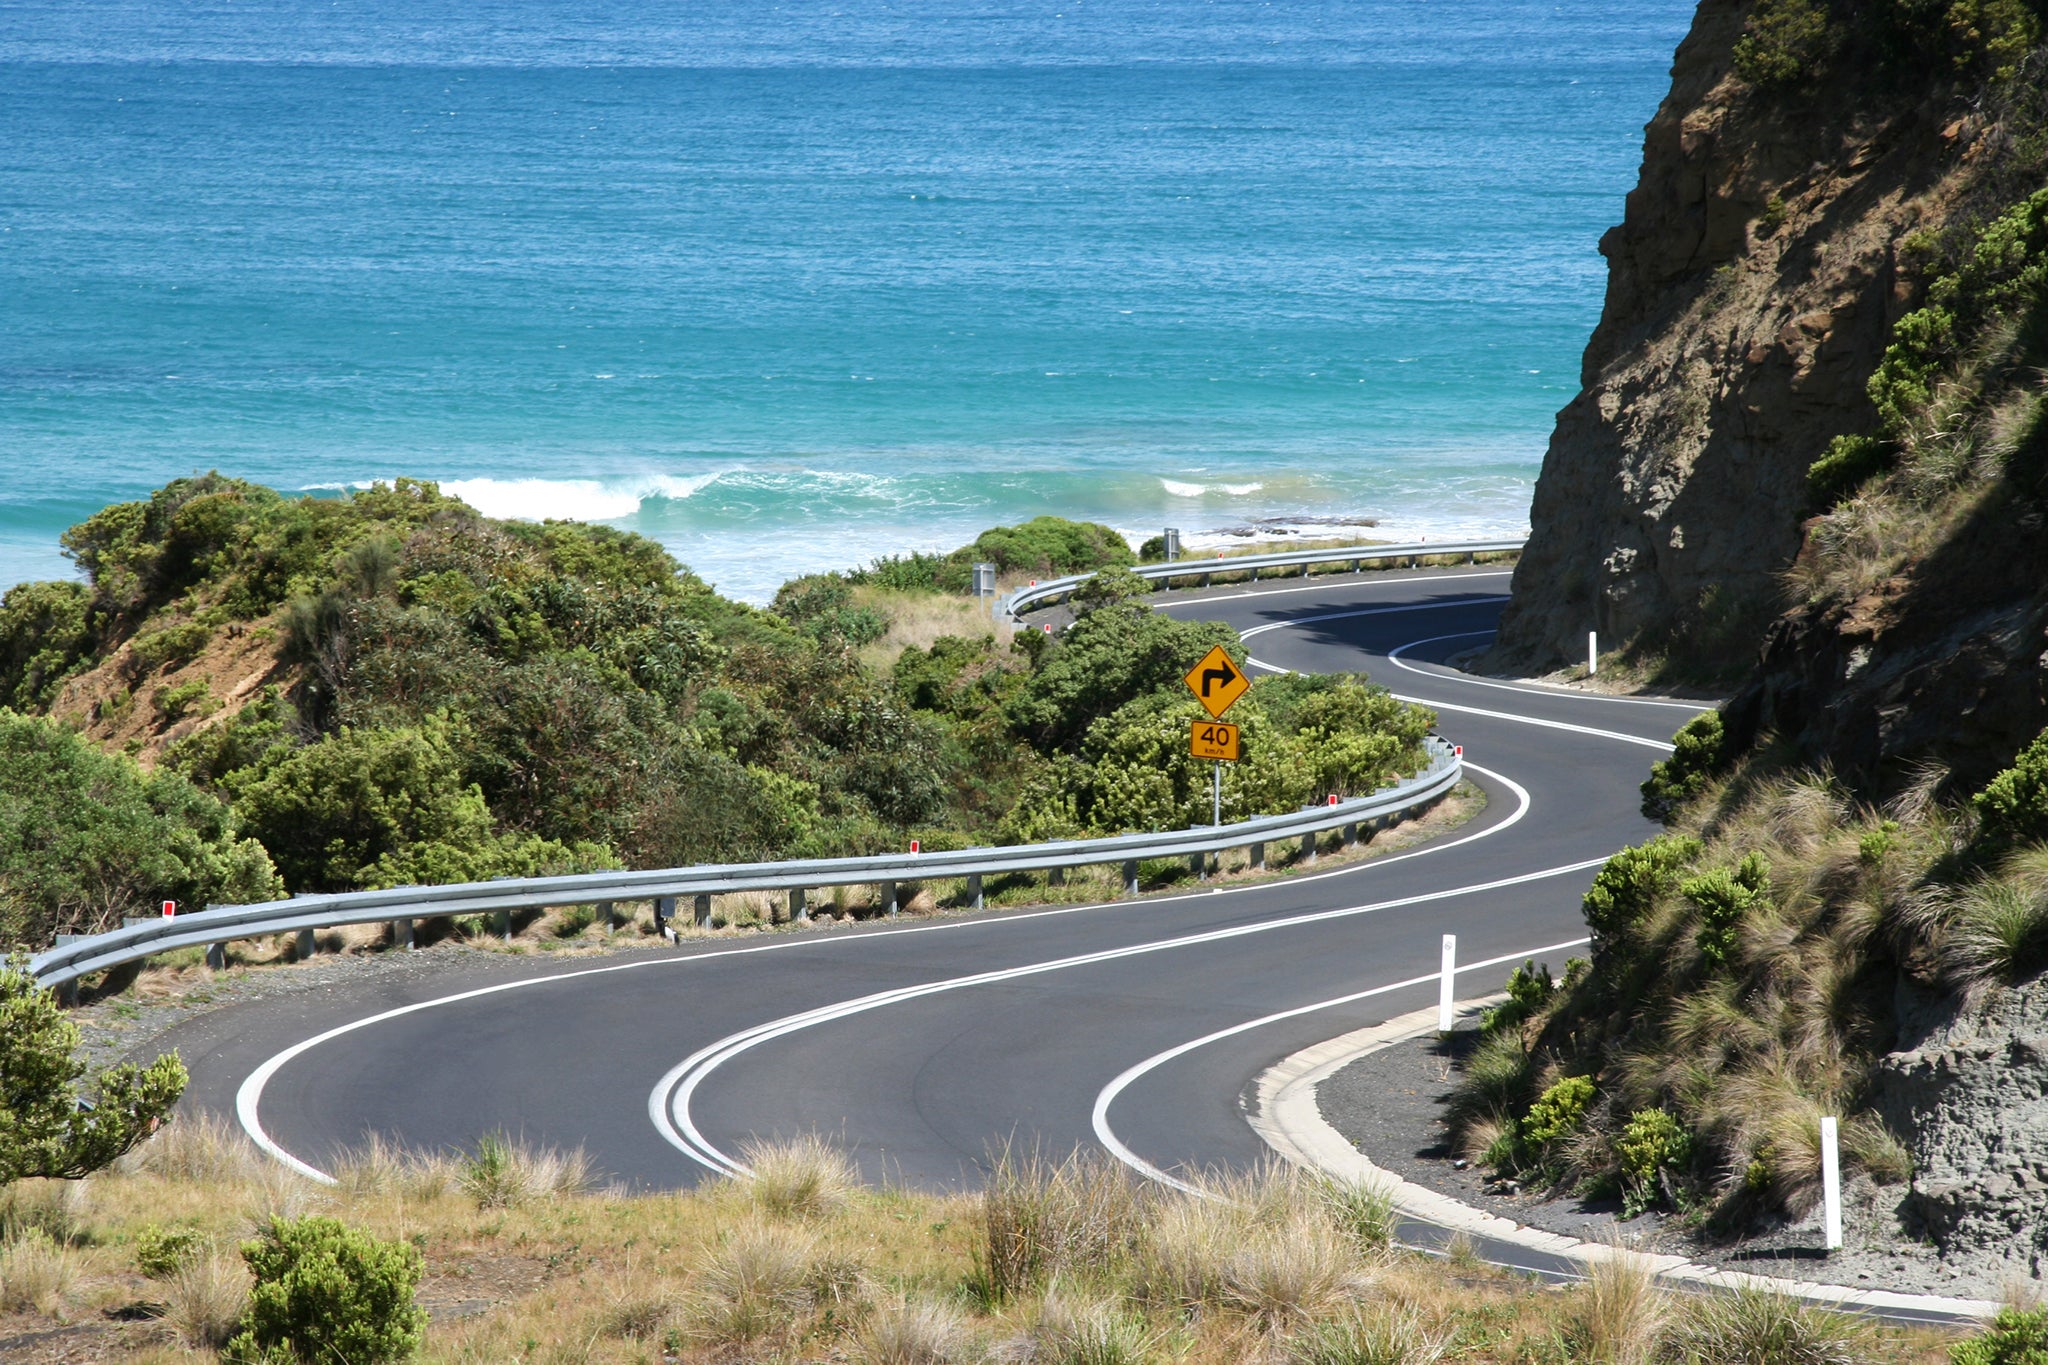 "The Great Ocean Road, Victoria, Australia. One of the world's best road trips."